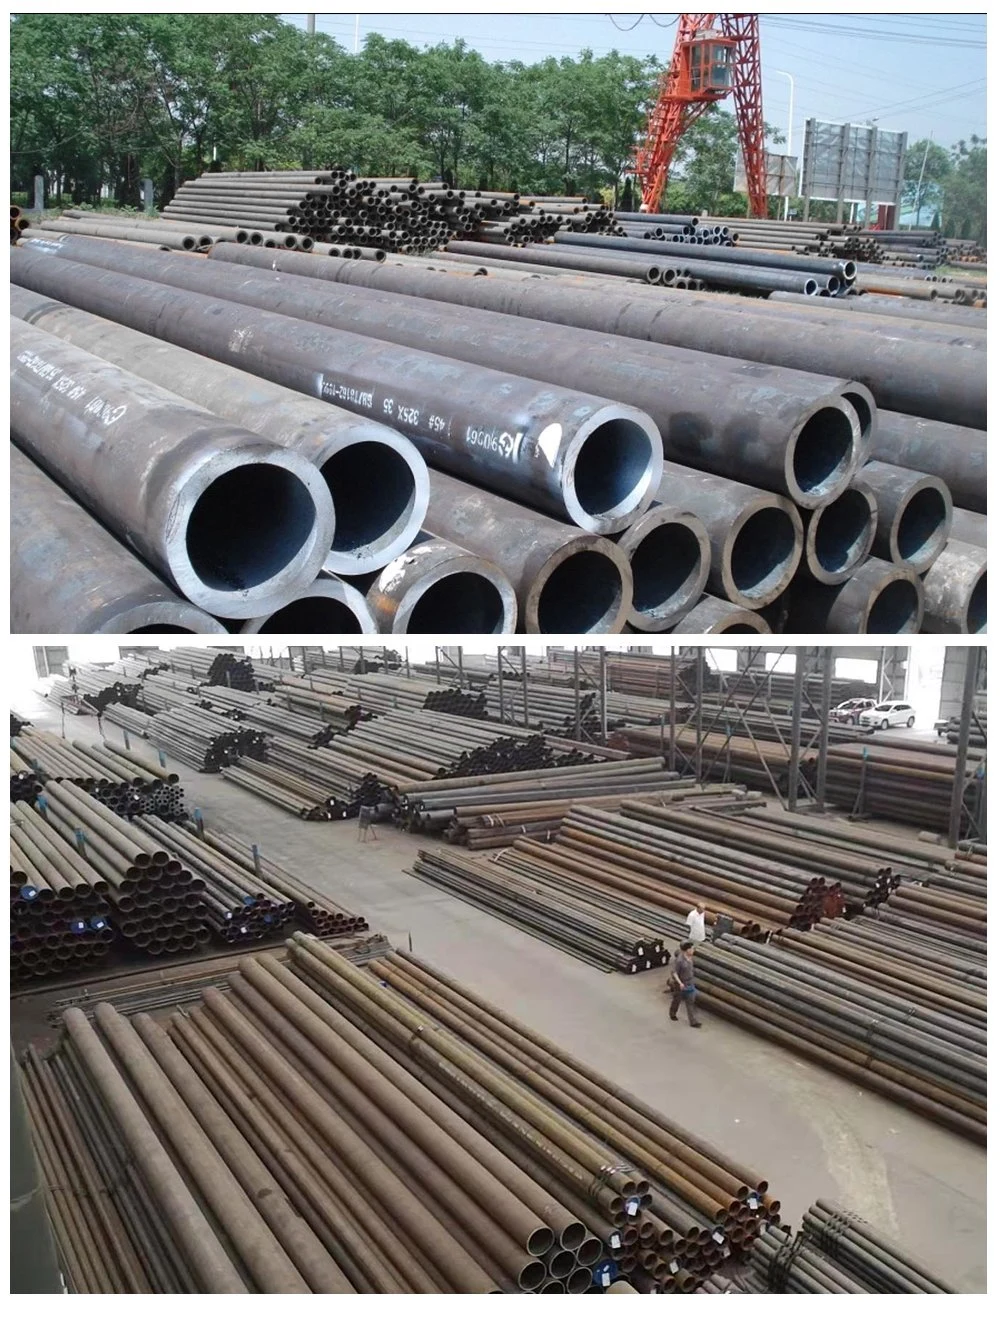 Ms Steel ERW Carbon ASTM A53 Black Iron Pipe Welded Sch40 Steel Pipe for Building Materia